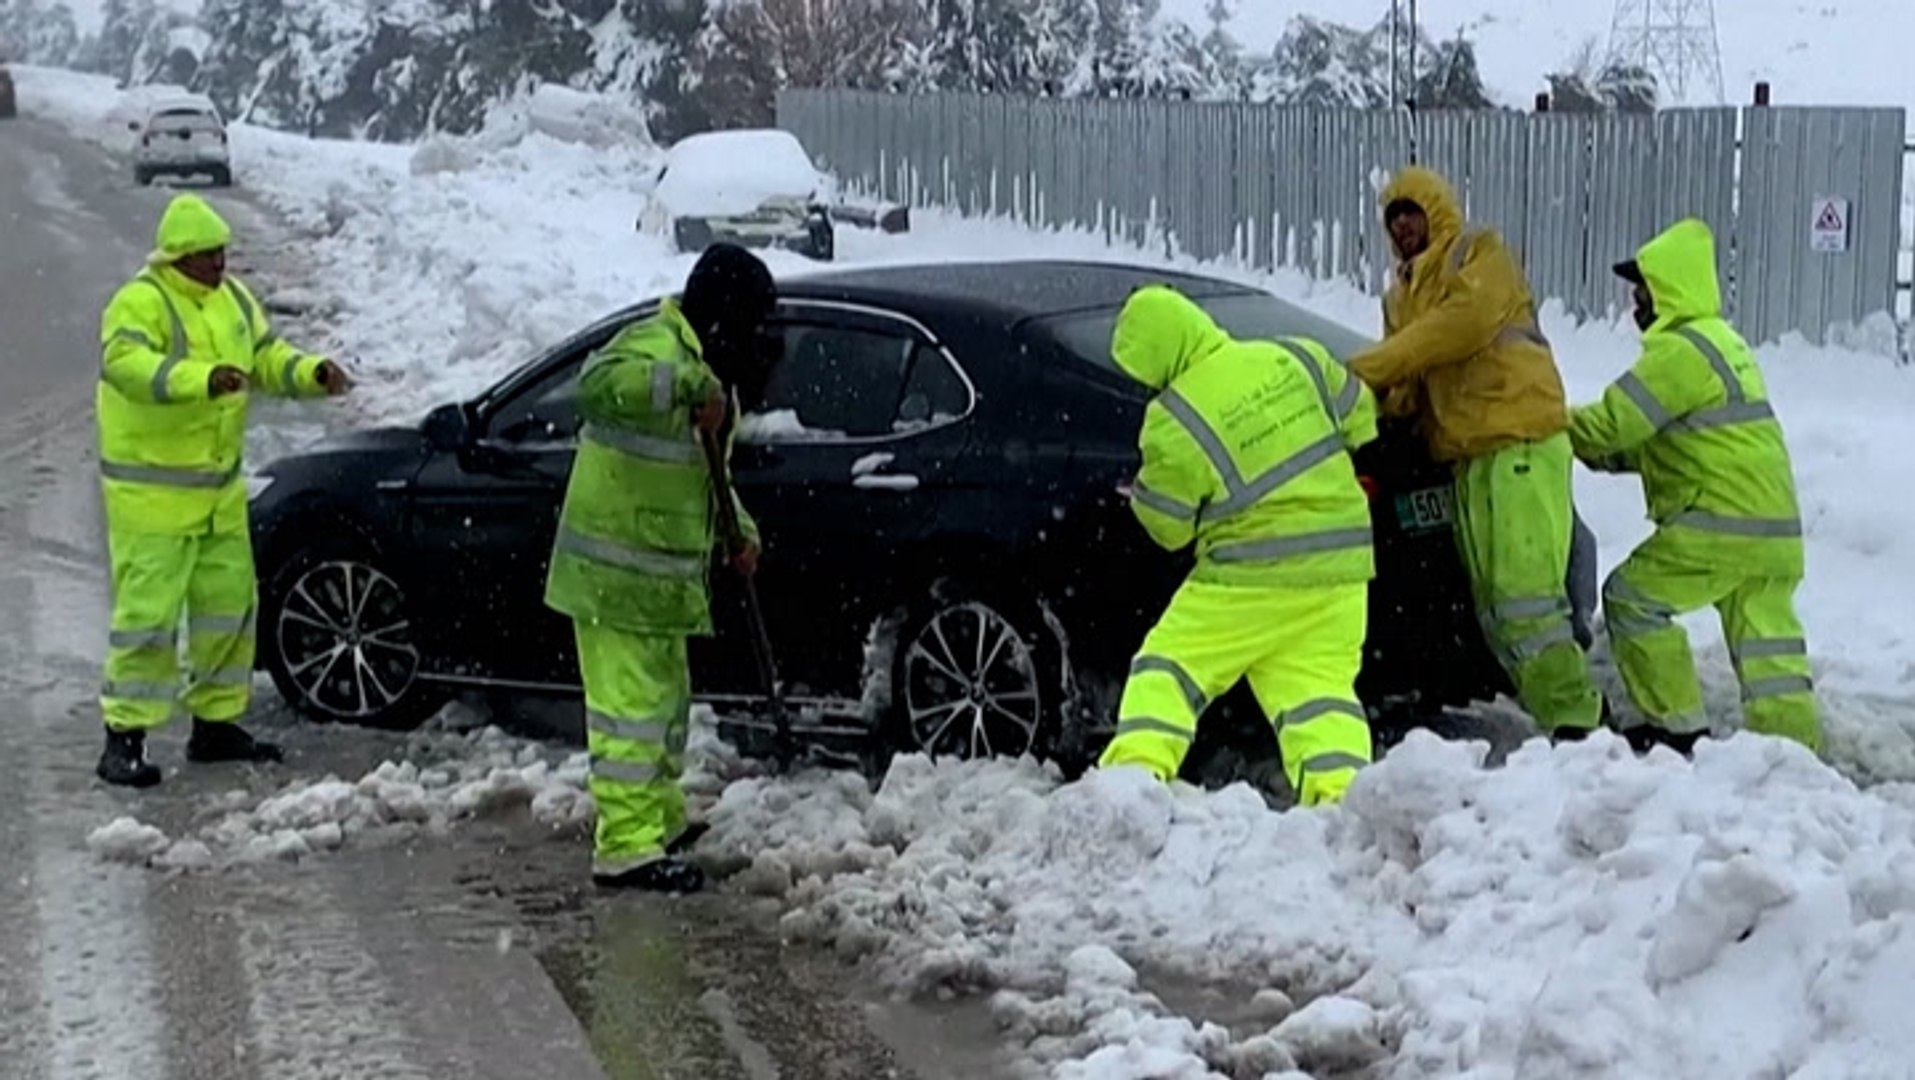 Vehicles rescued from heavy snow in Jordan - video Dailymotion